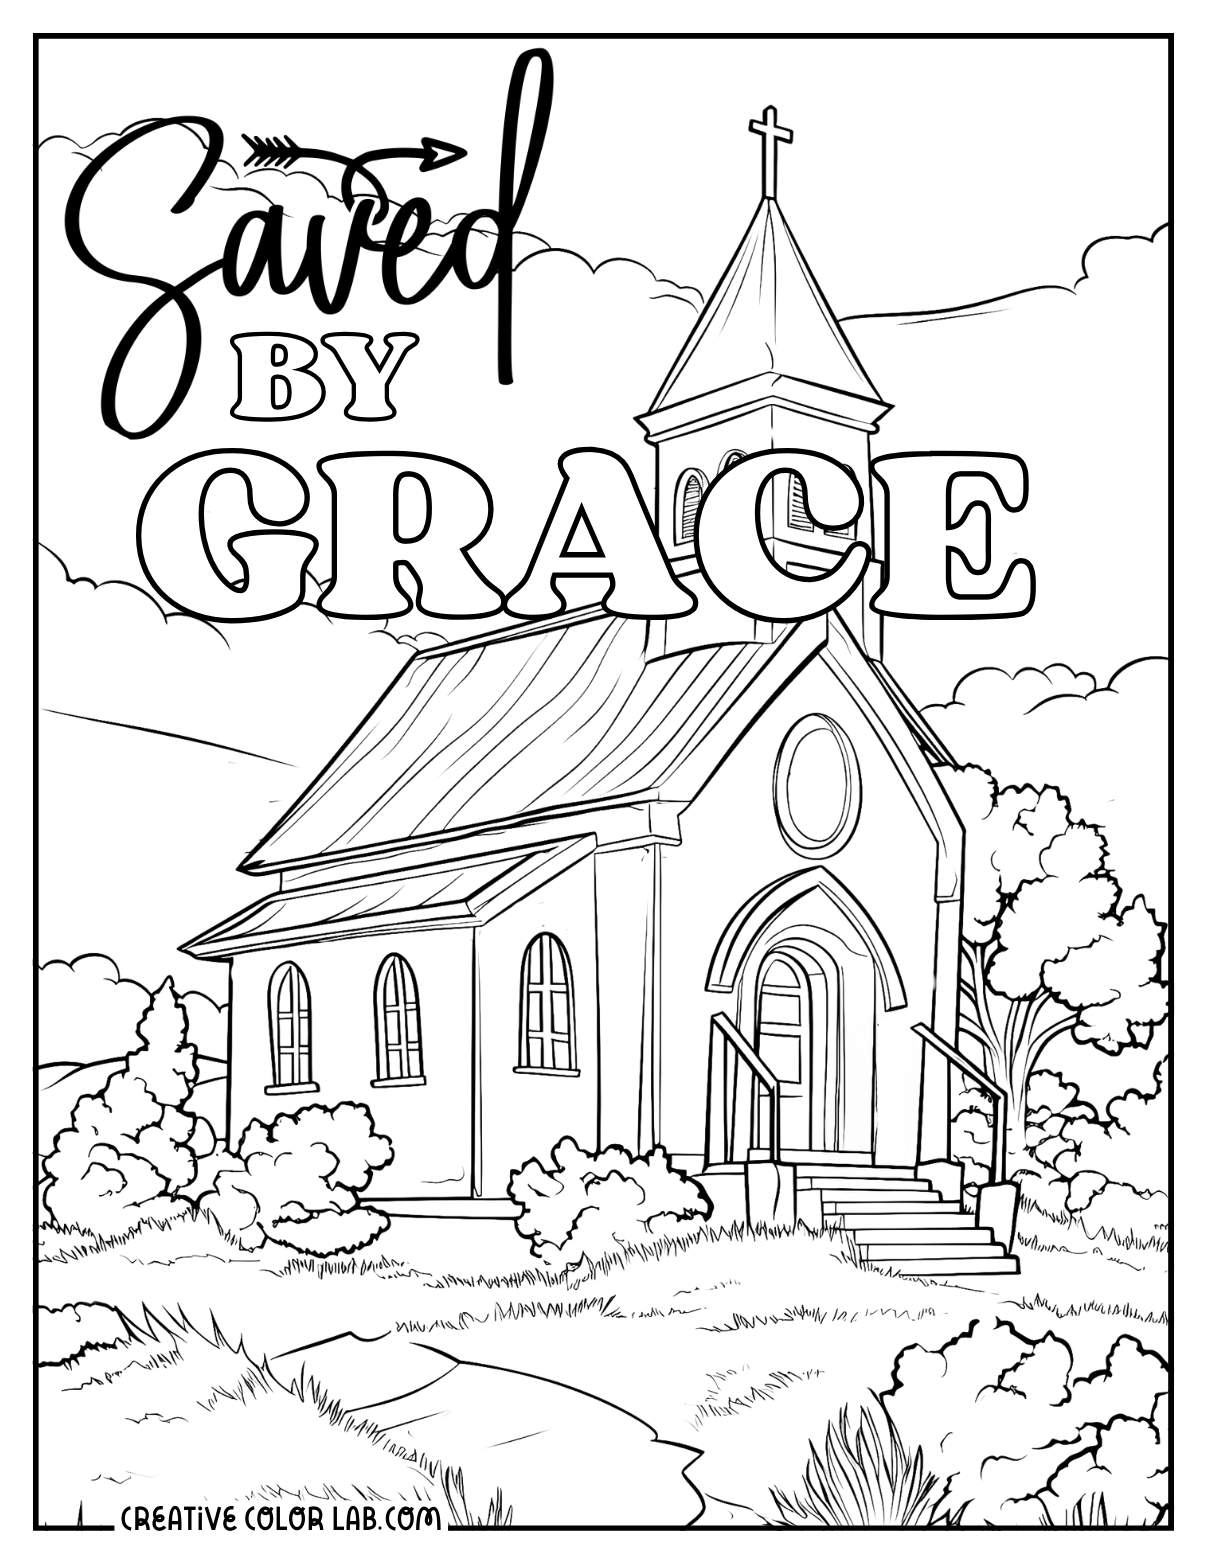 Saved by grace church outline to color for kids.